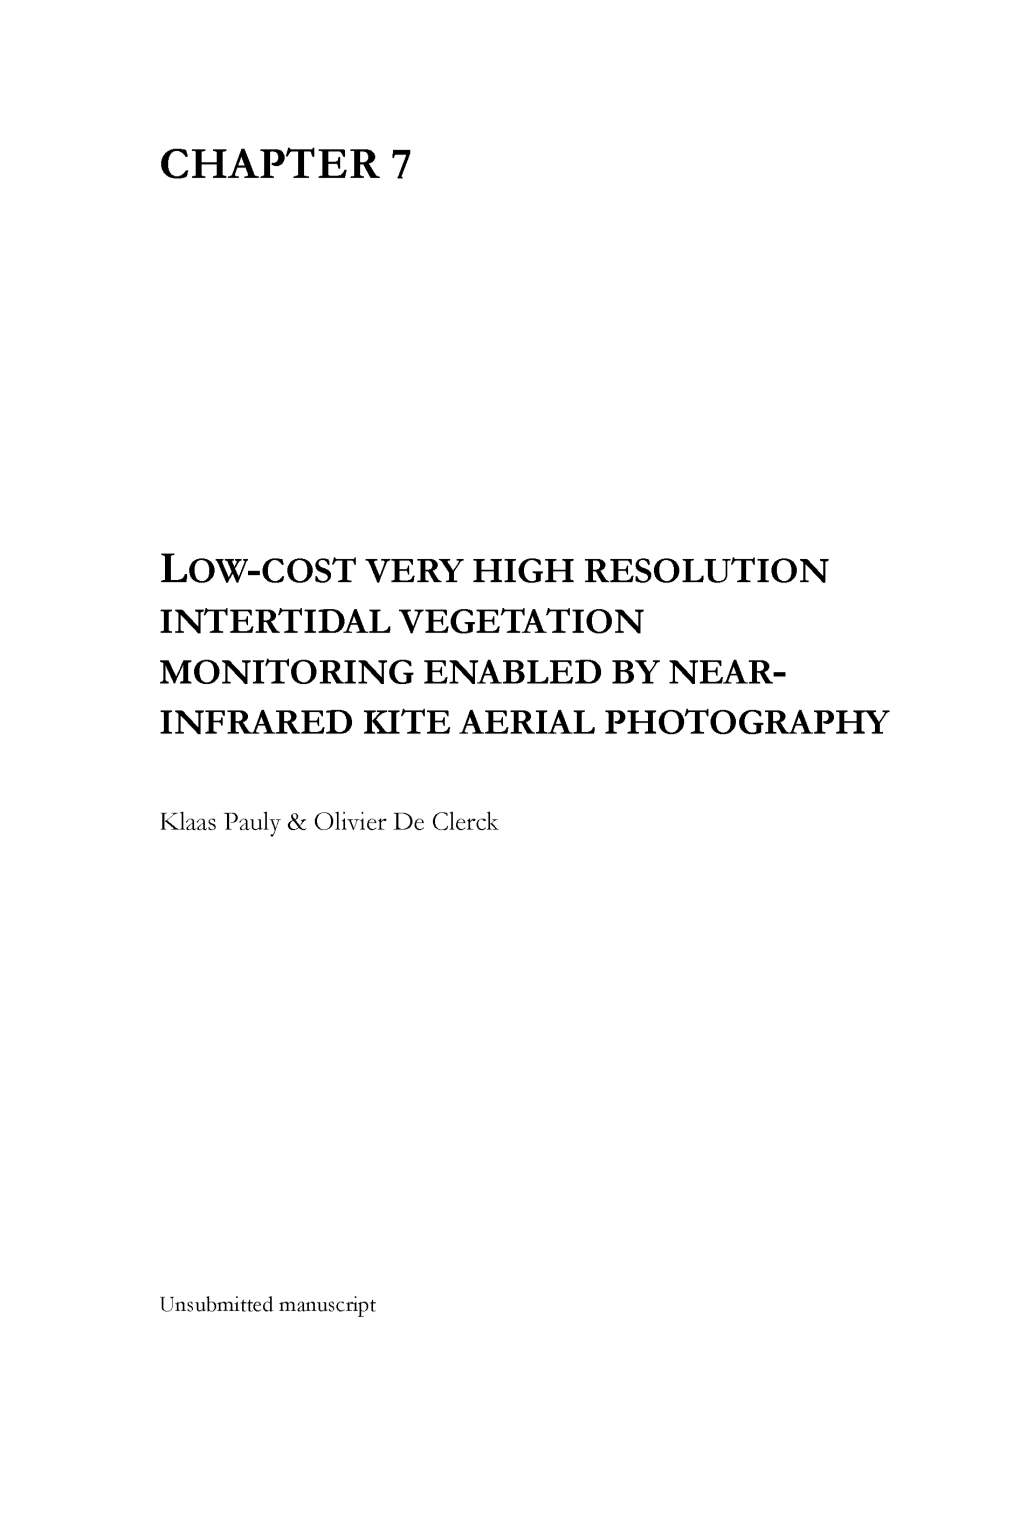 Intertidal Vegetation Monitoring Enabled by Near- Infrared Kite Aerial Photography